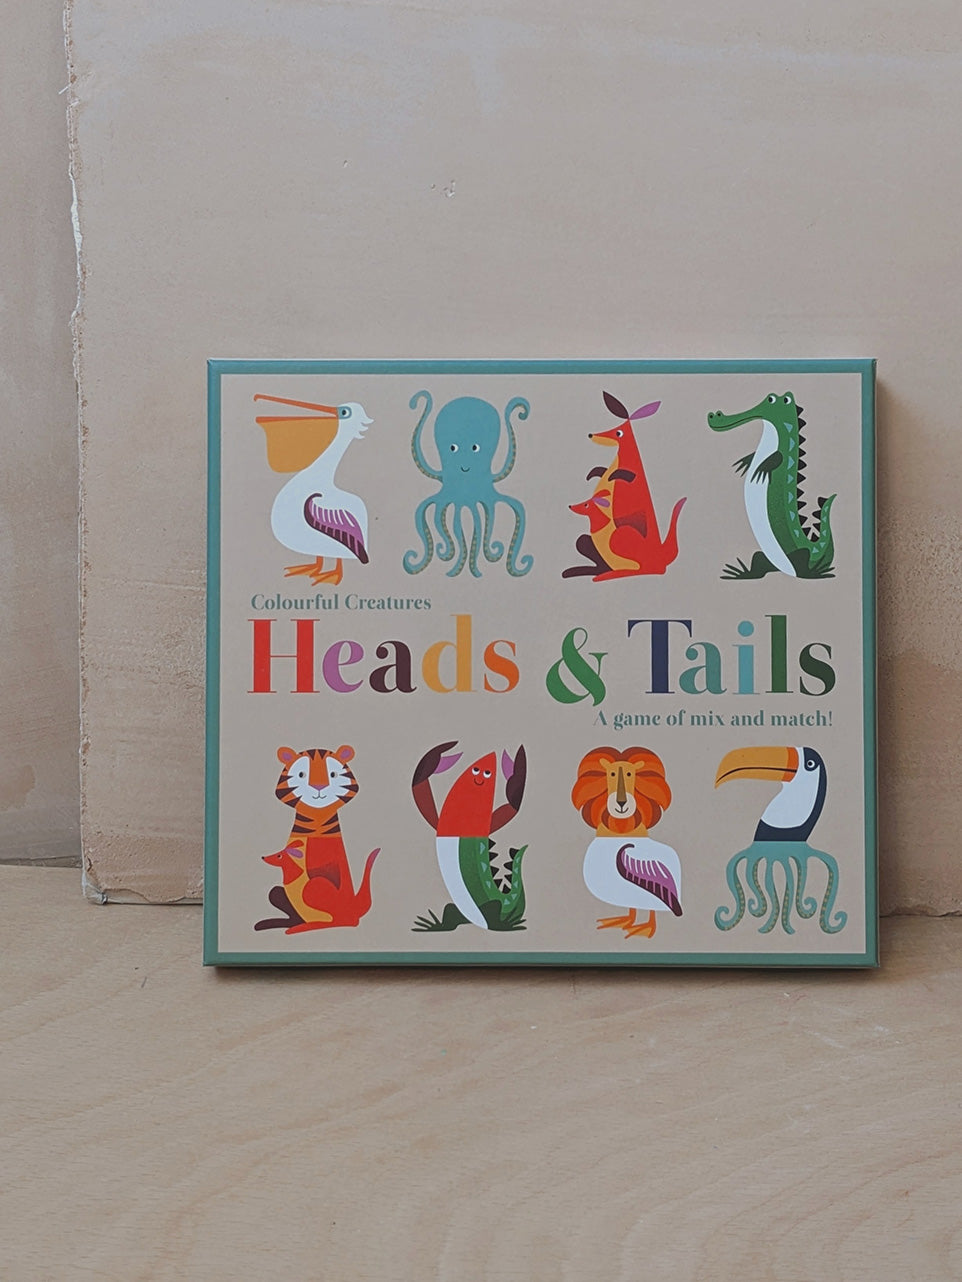 Rex London Colourful Creatures Heads & Tails game of mix and match